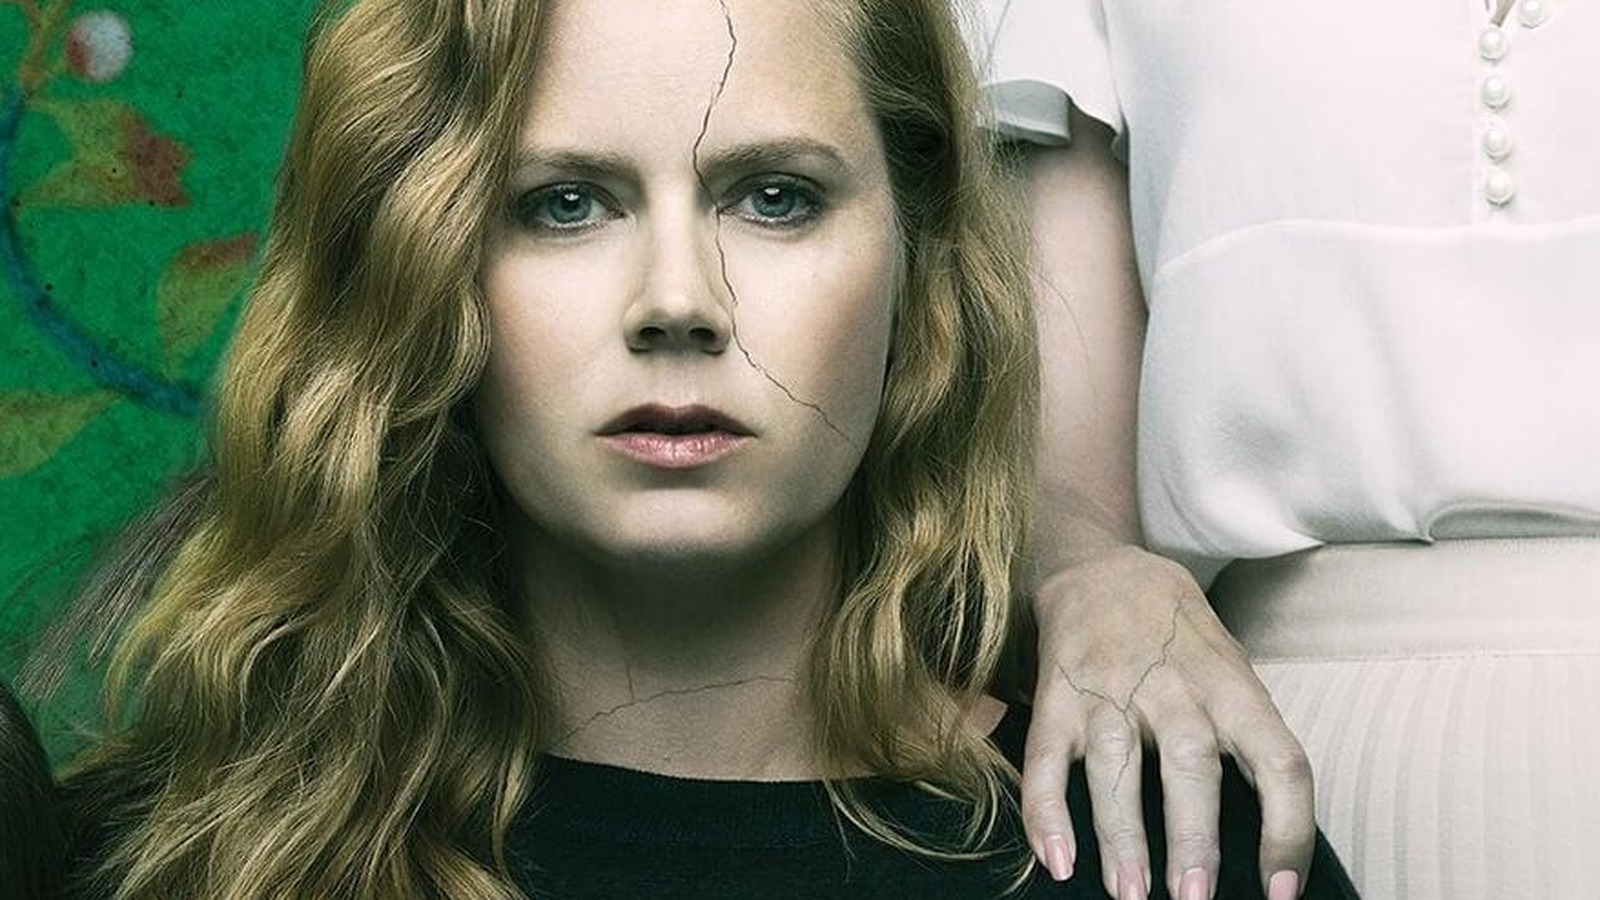 Sharp Objects Ending Explained: The Truth Hurts